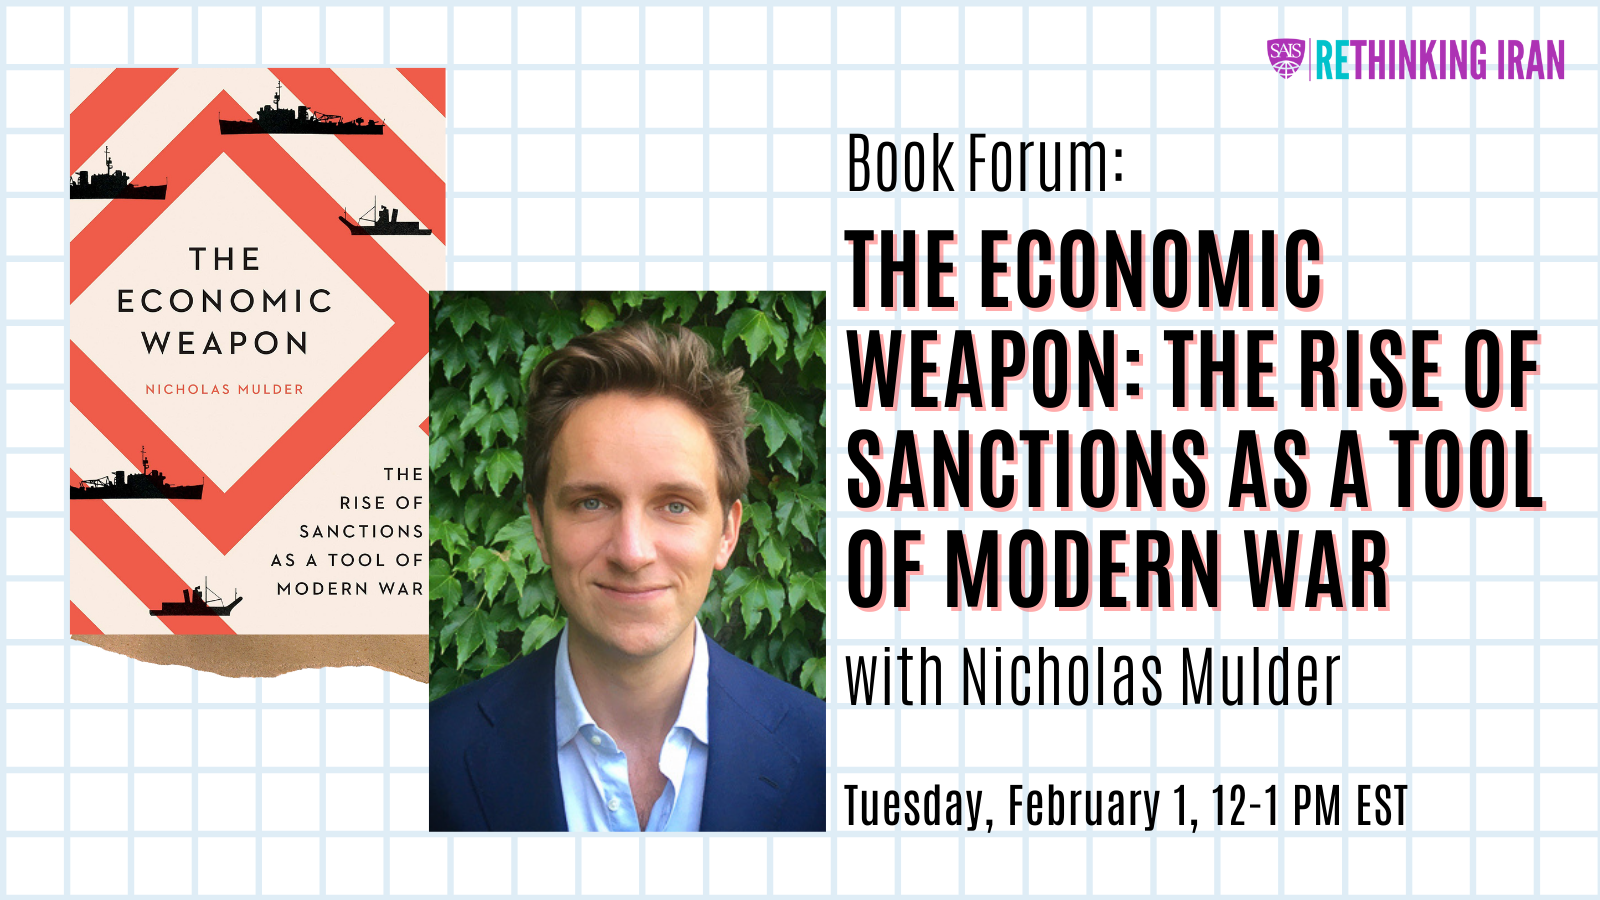 Book Forum - The Economic Weapon: The Rise of Sanctions as a Tool of Modern War [PAST EVENT]